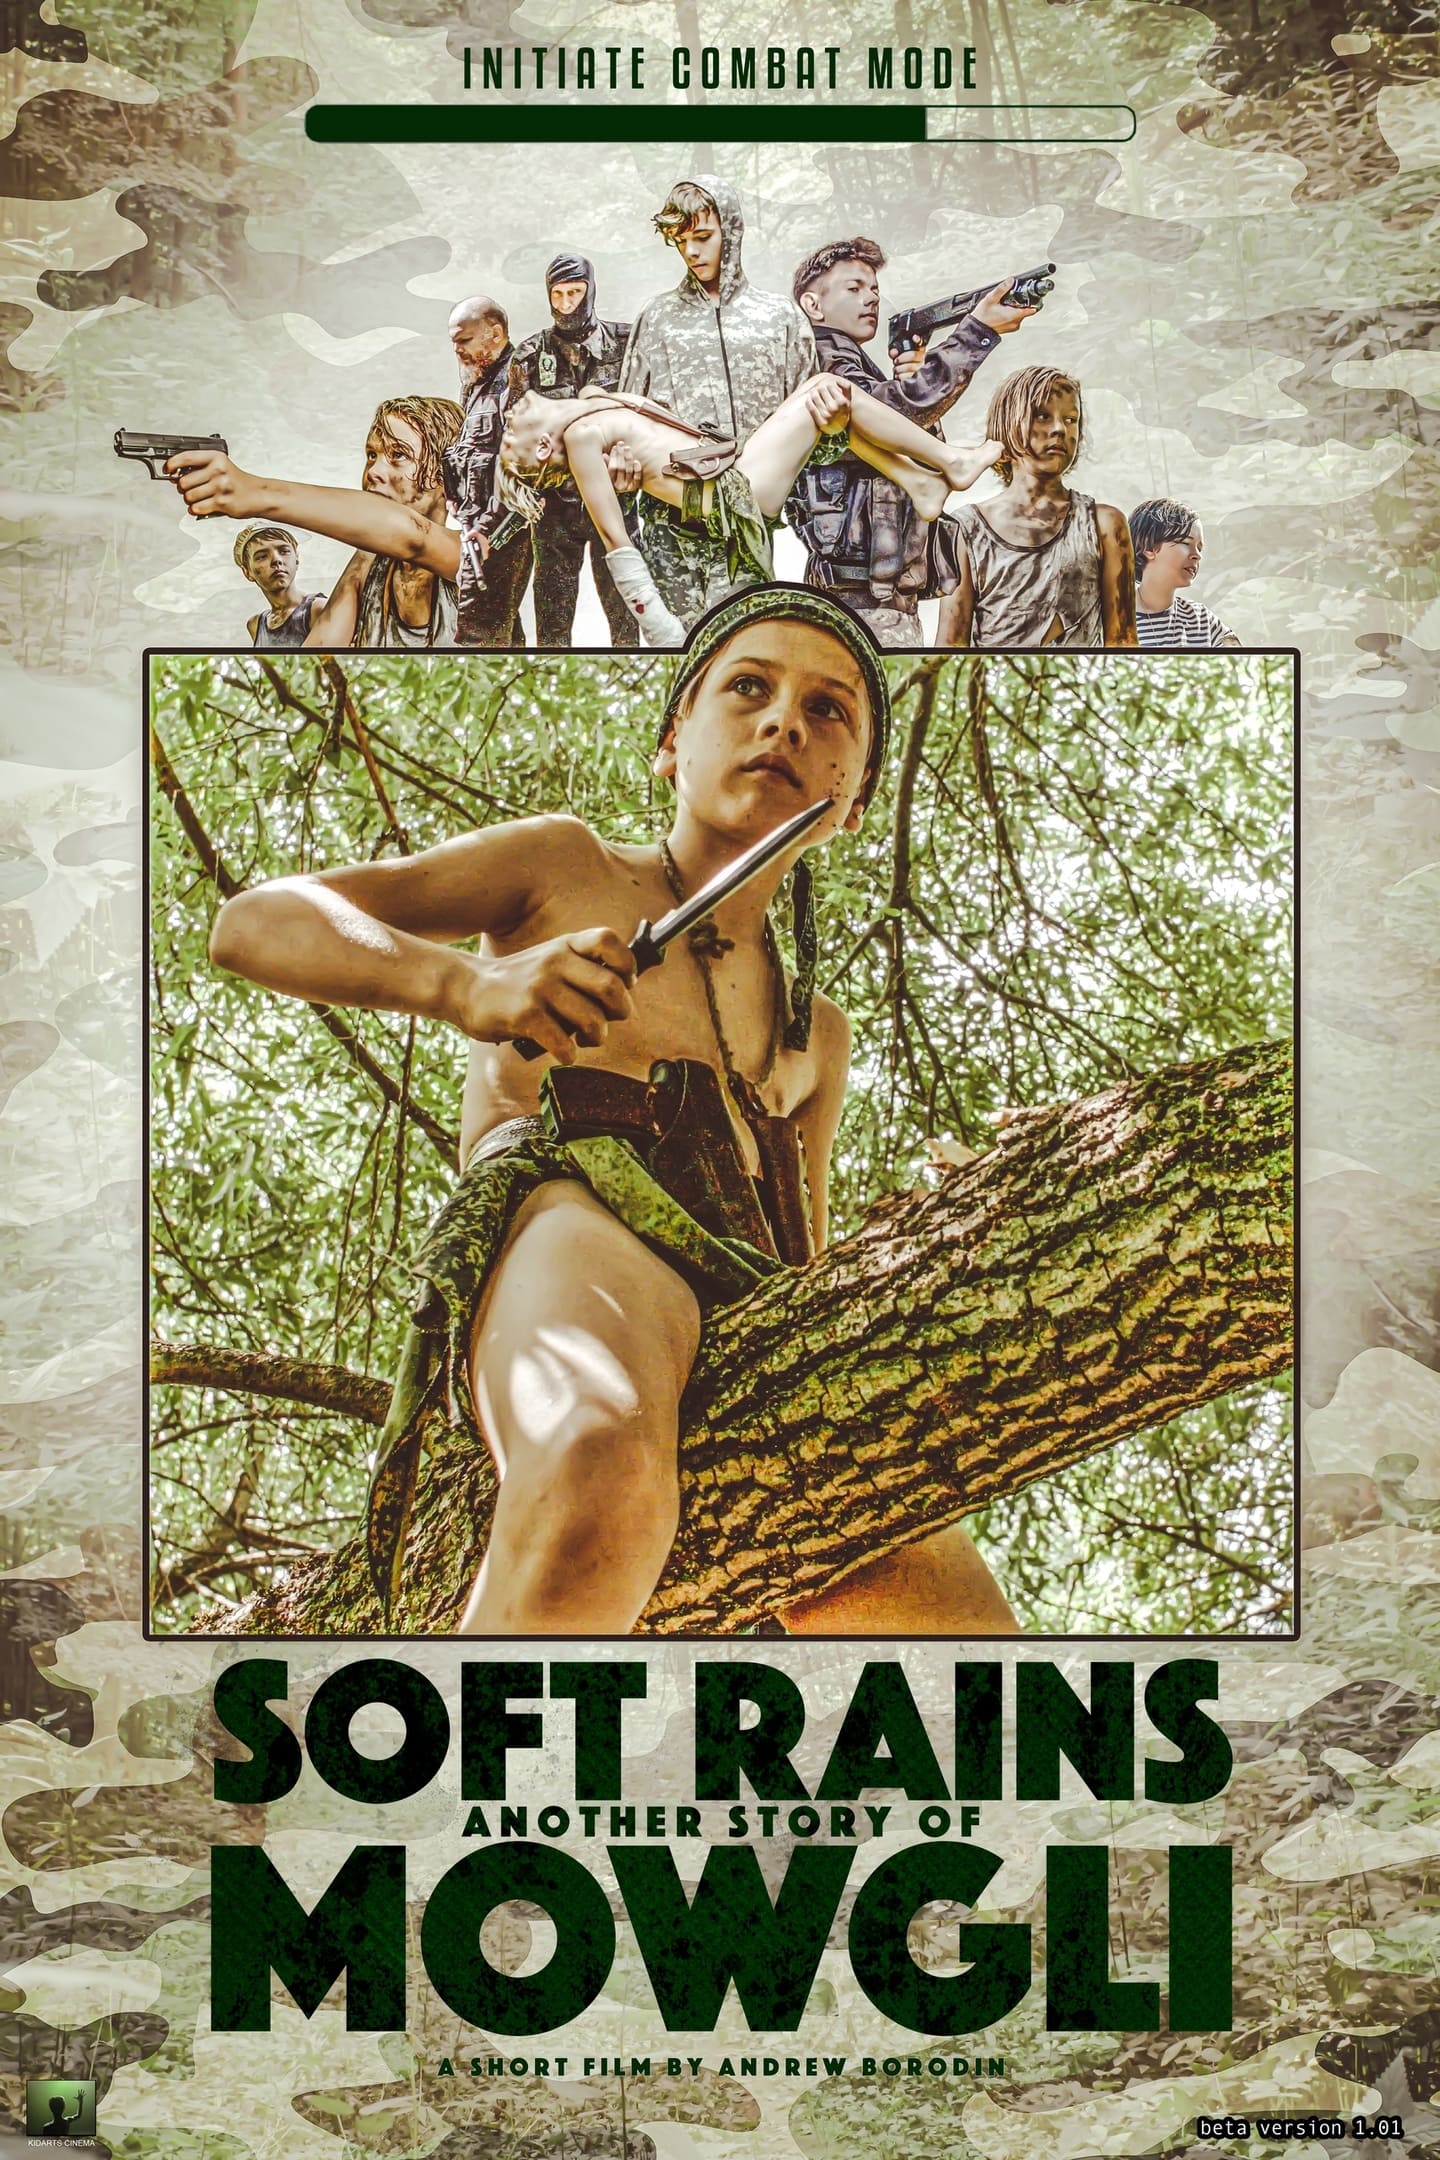 Soft Rain or Another Story of Mowgli